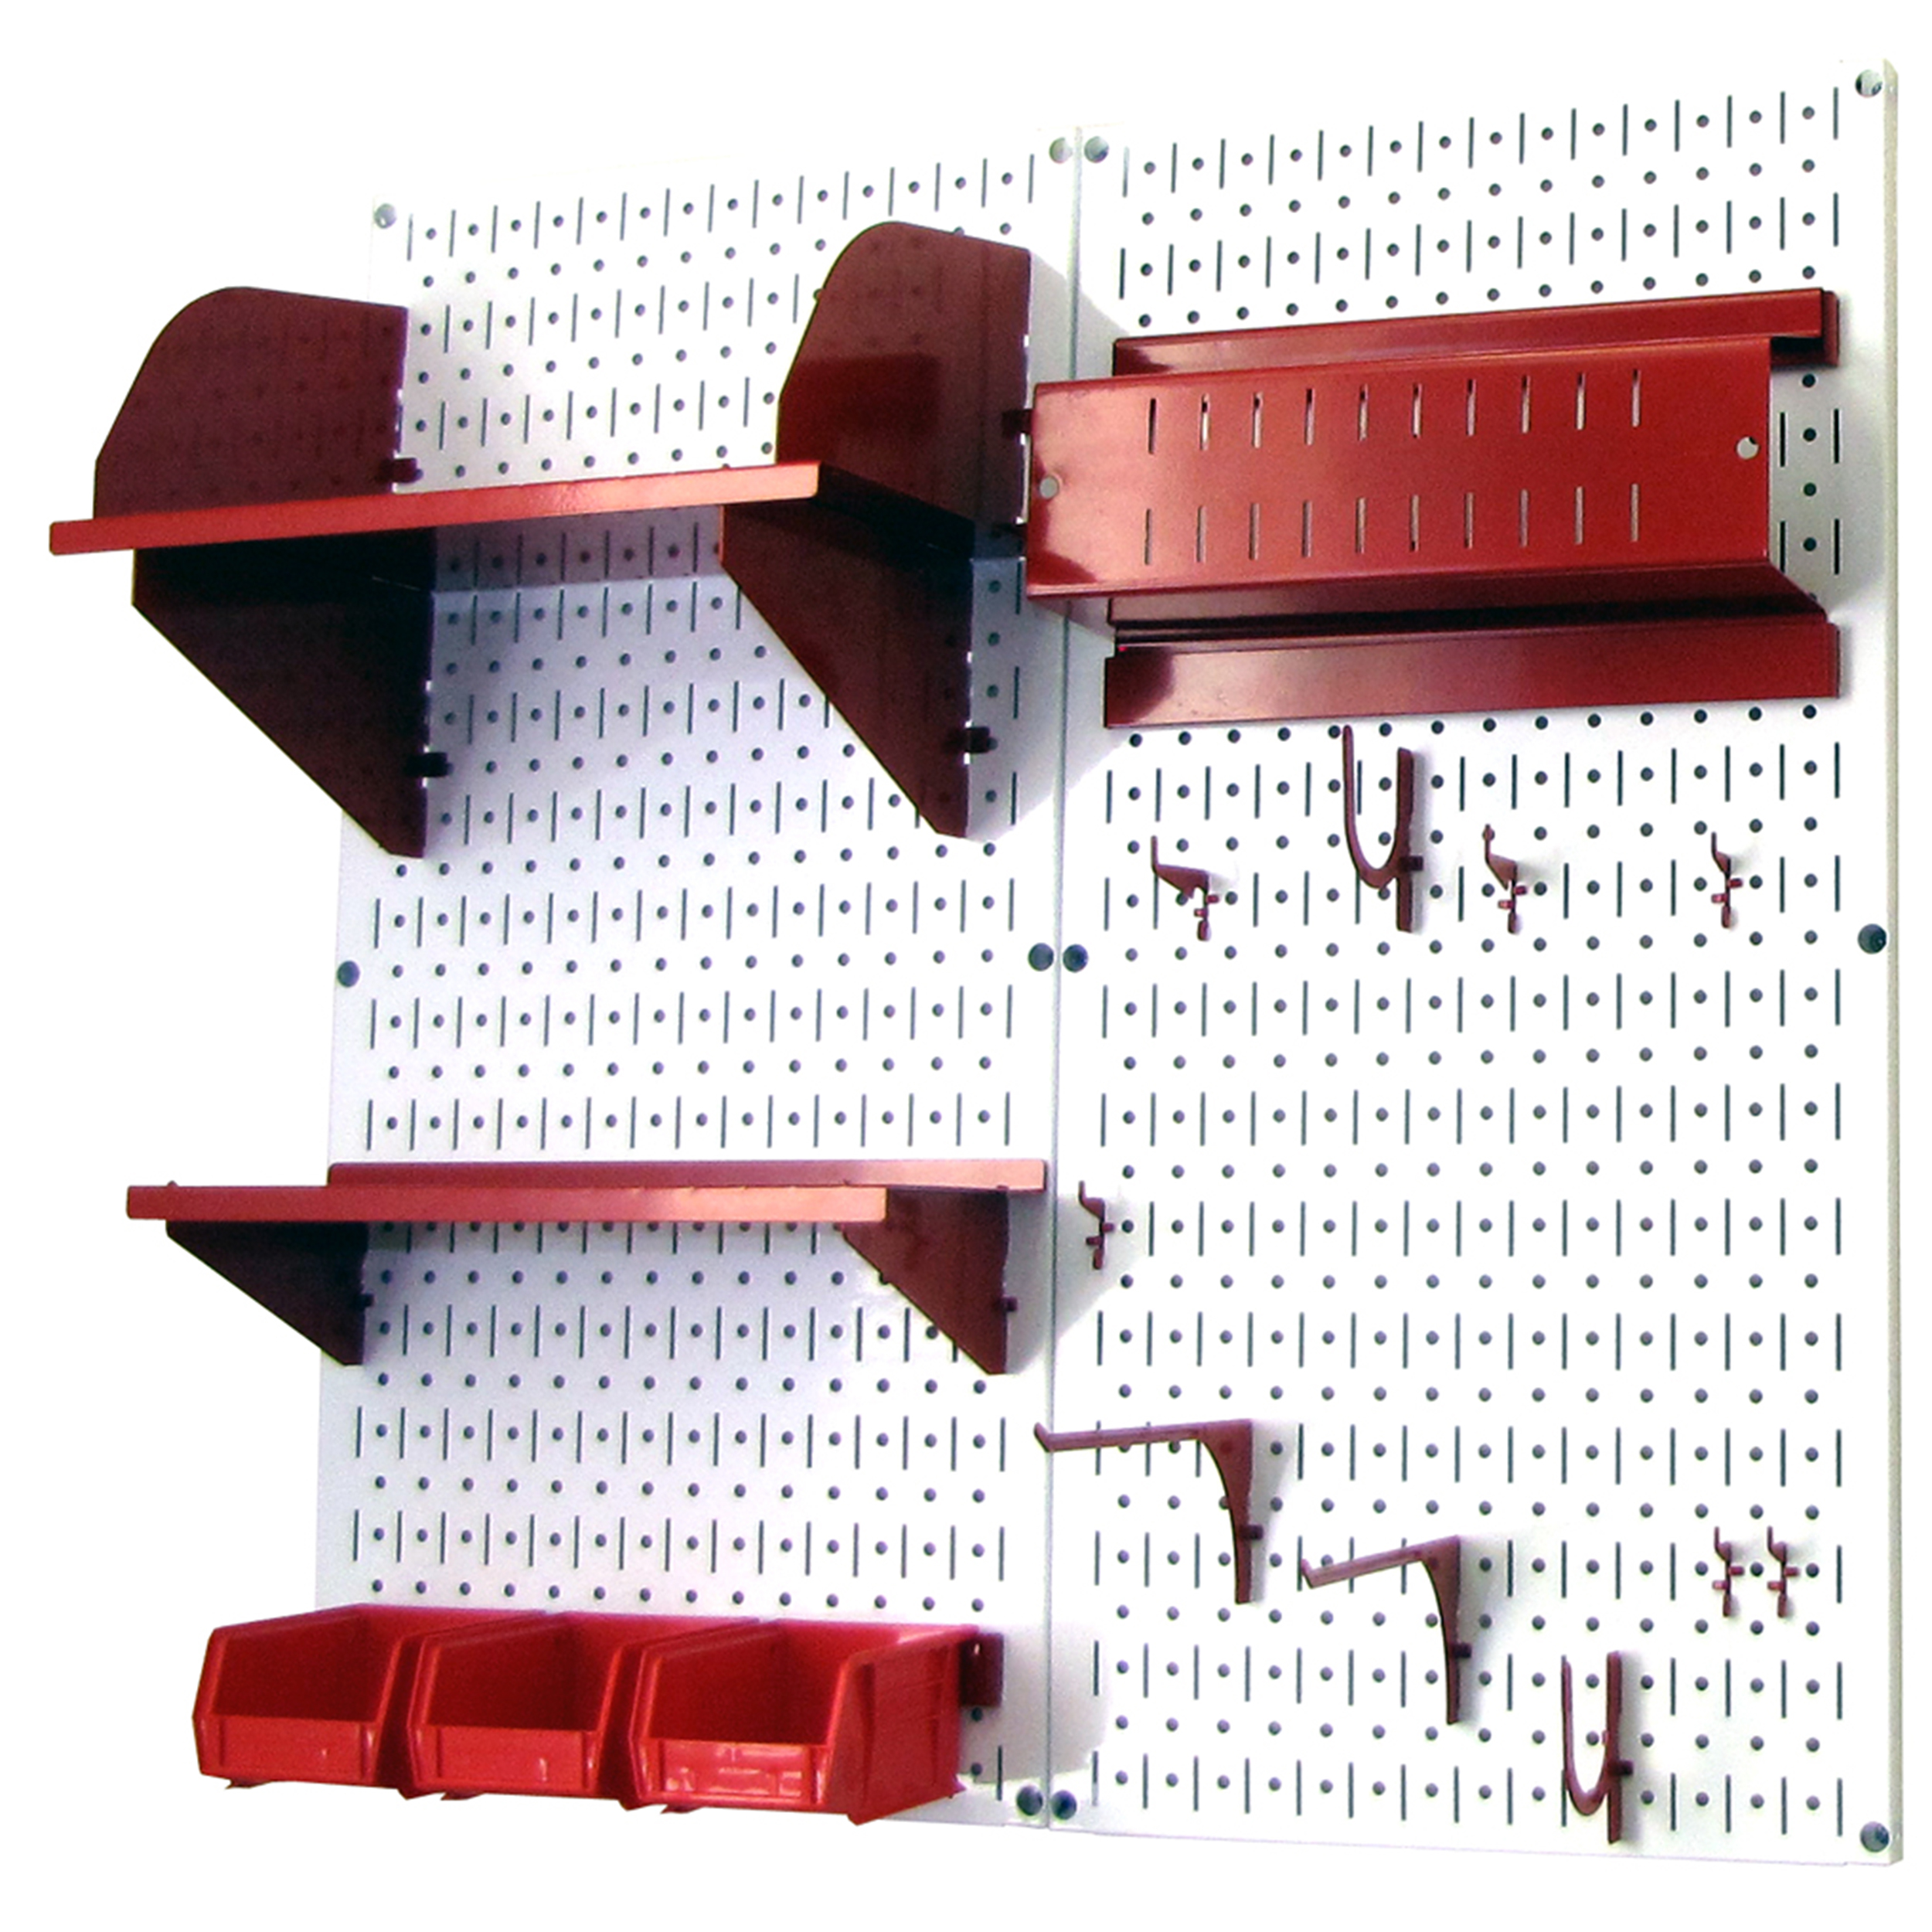 Pegboard Hobby Craft Pegboard Organizer Storage Kit With White Pegboard And Red Accessories